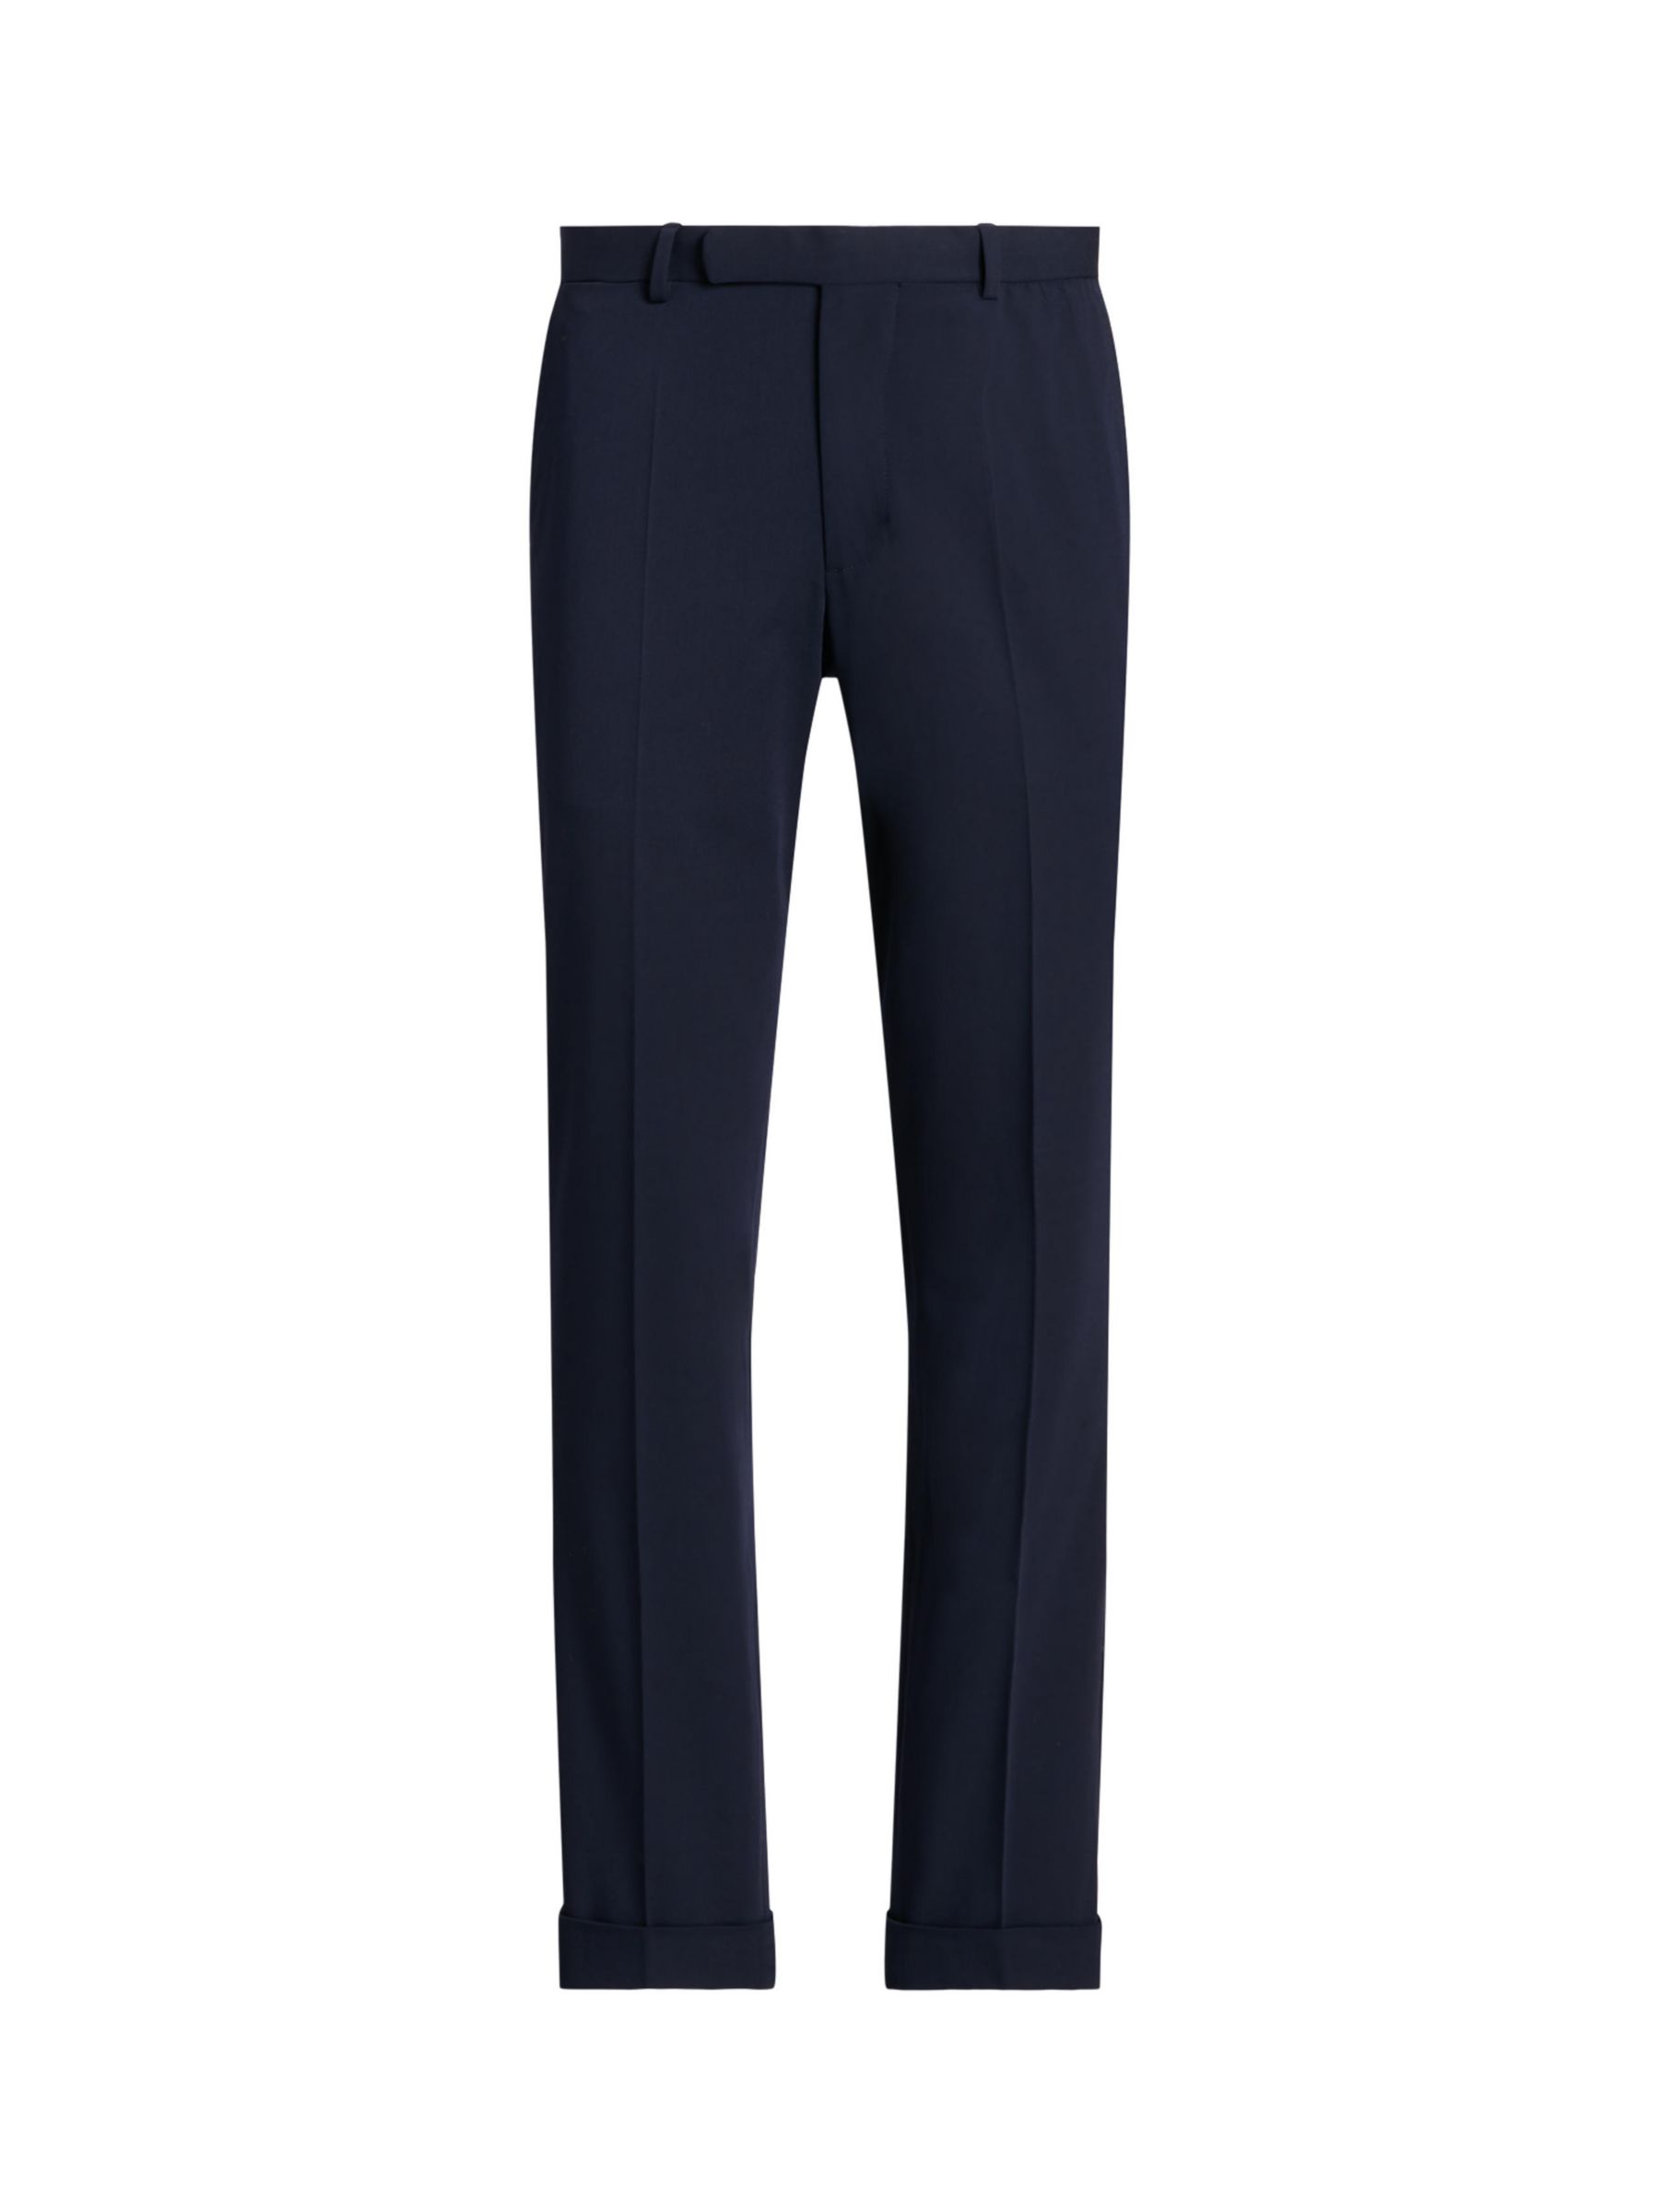 Polo Ralph Lauren Performance Stretch Twill Suit Trouser, Navy, 40R